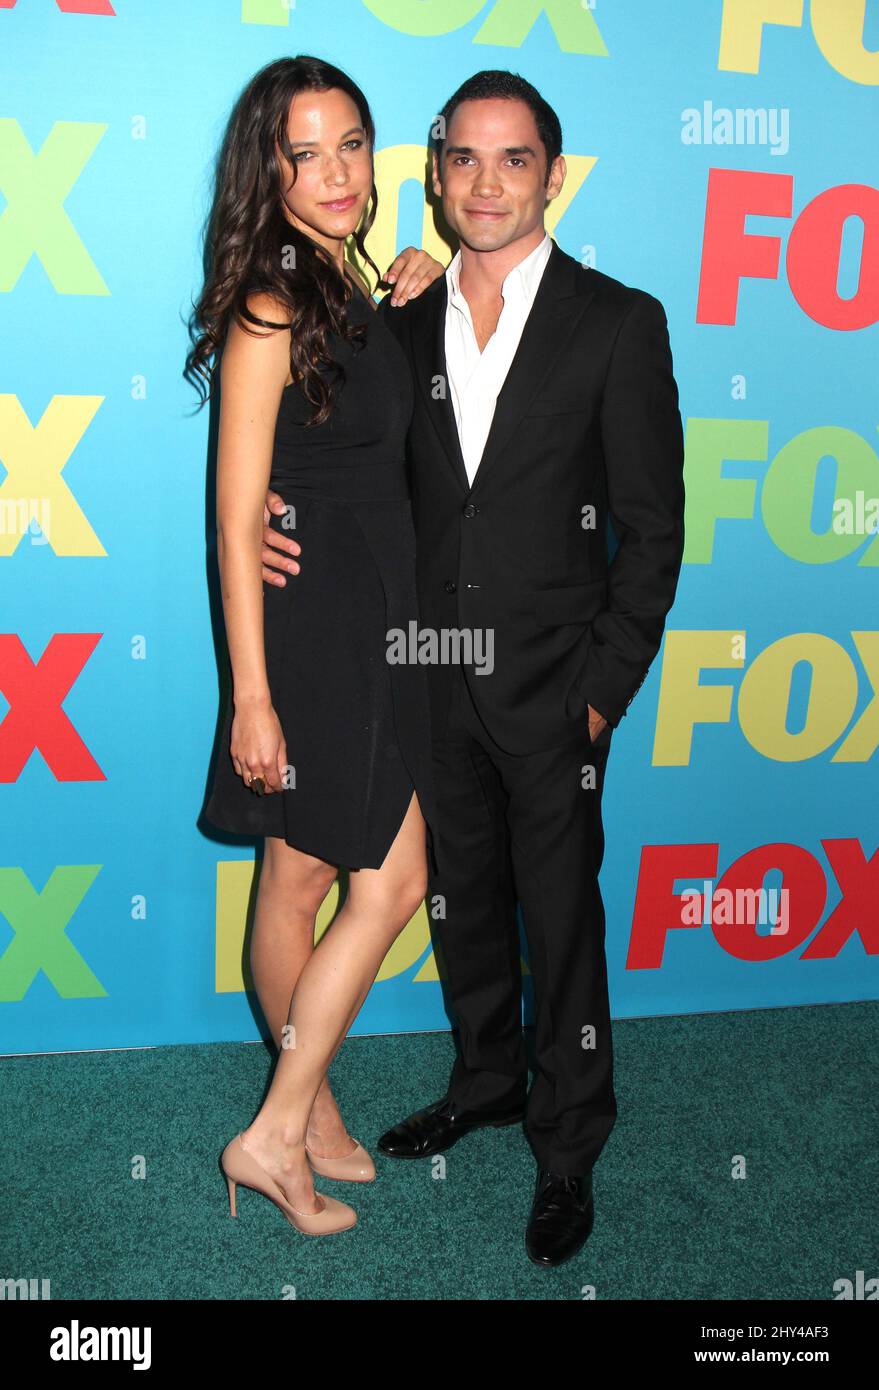 Caroline Ford and Reece Ritchie attending FOX Networks 2014 Upfront Presentation held at FOX Fanfront in New York, USA. Stock Photo